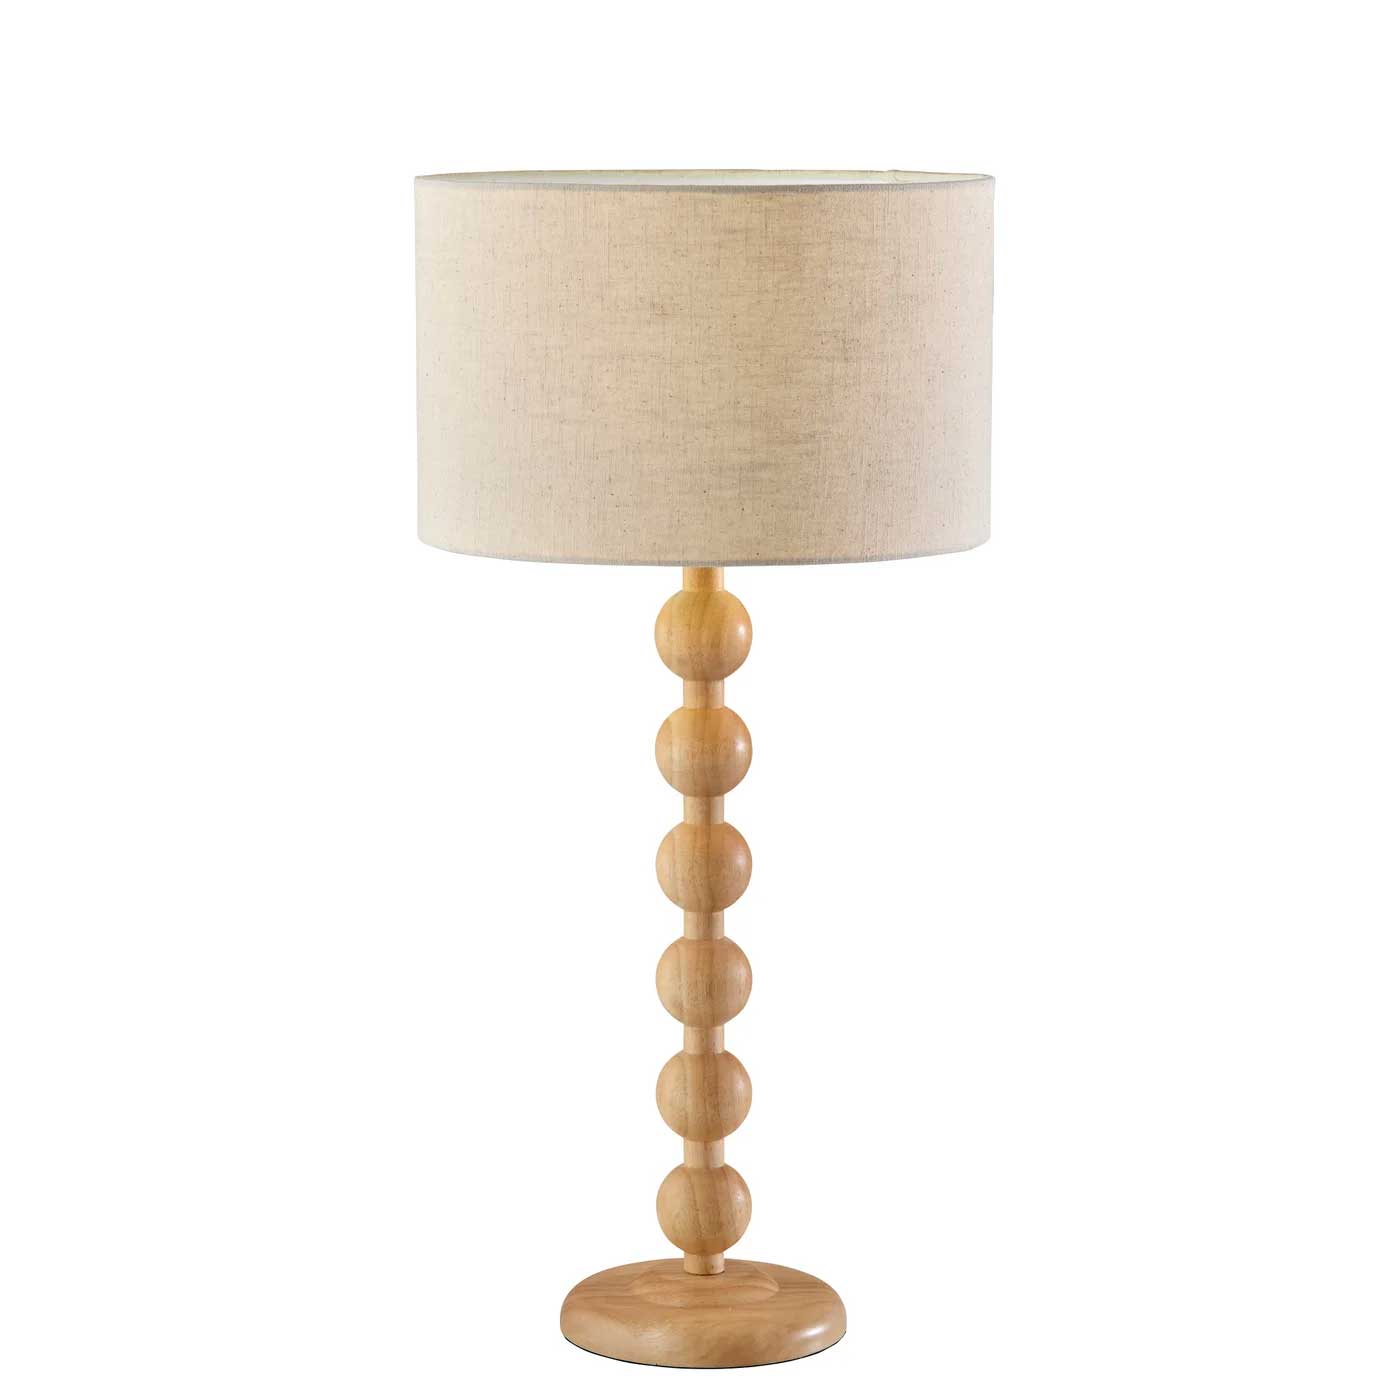 ORCHARD Table lamp Wood - 3931-12 | ADESSO